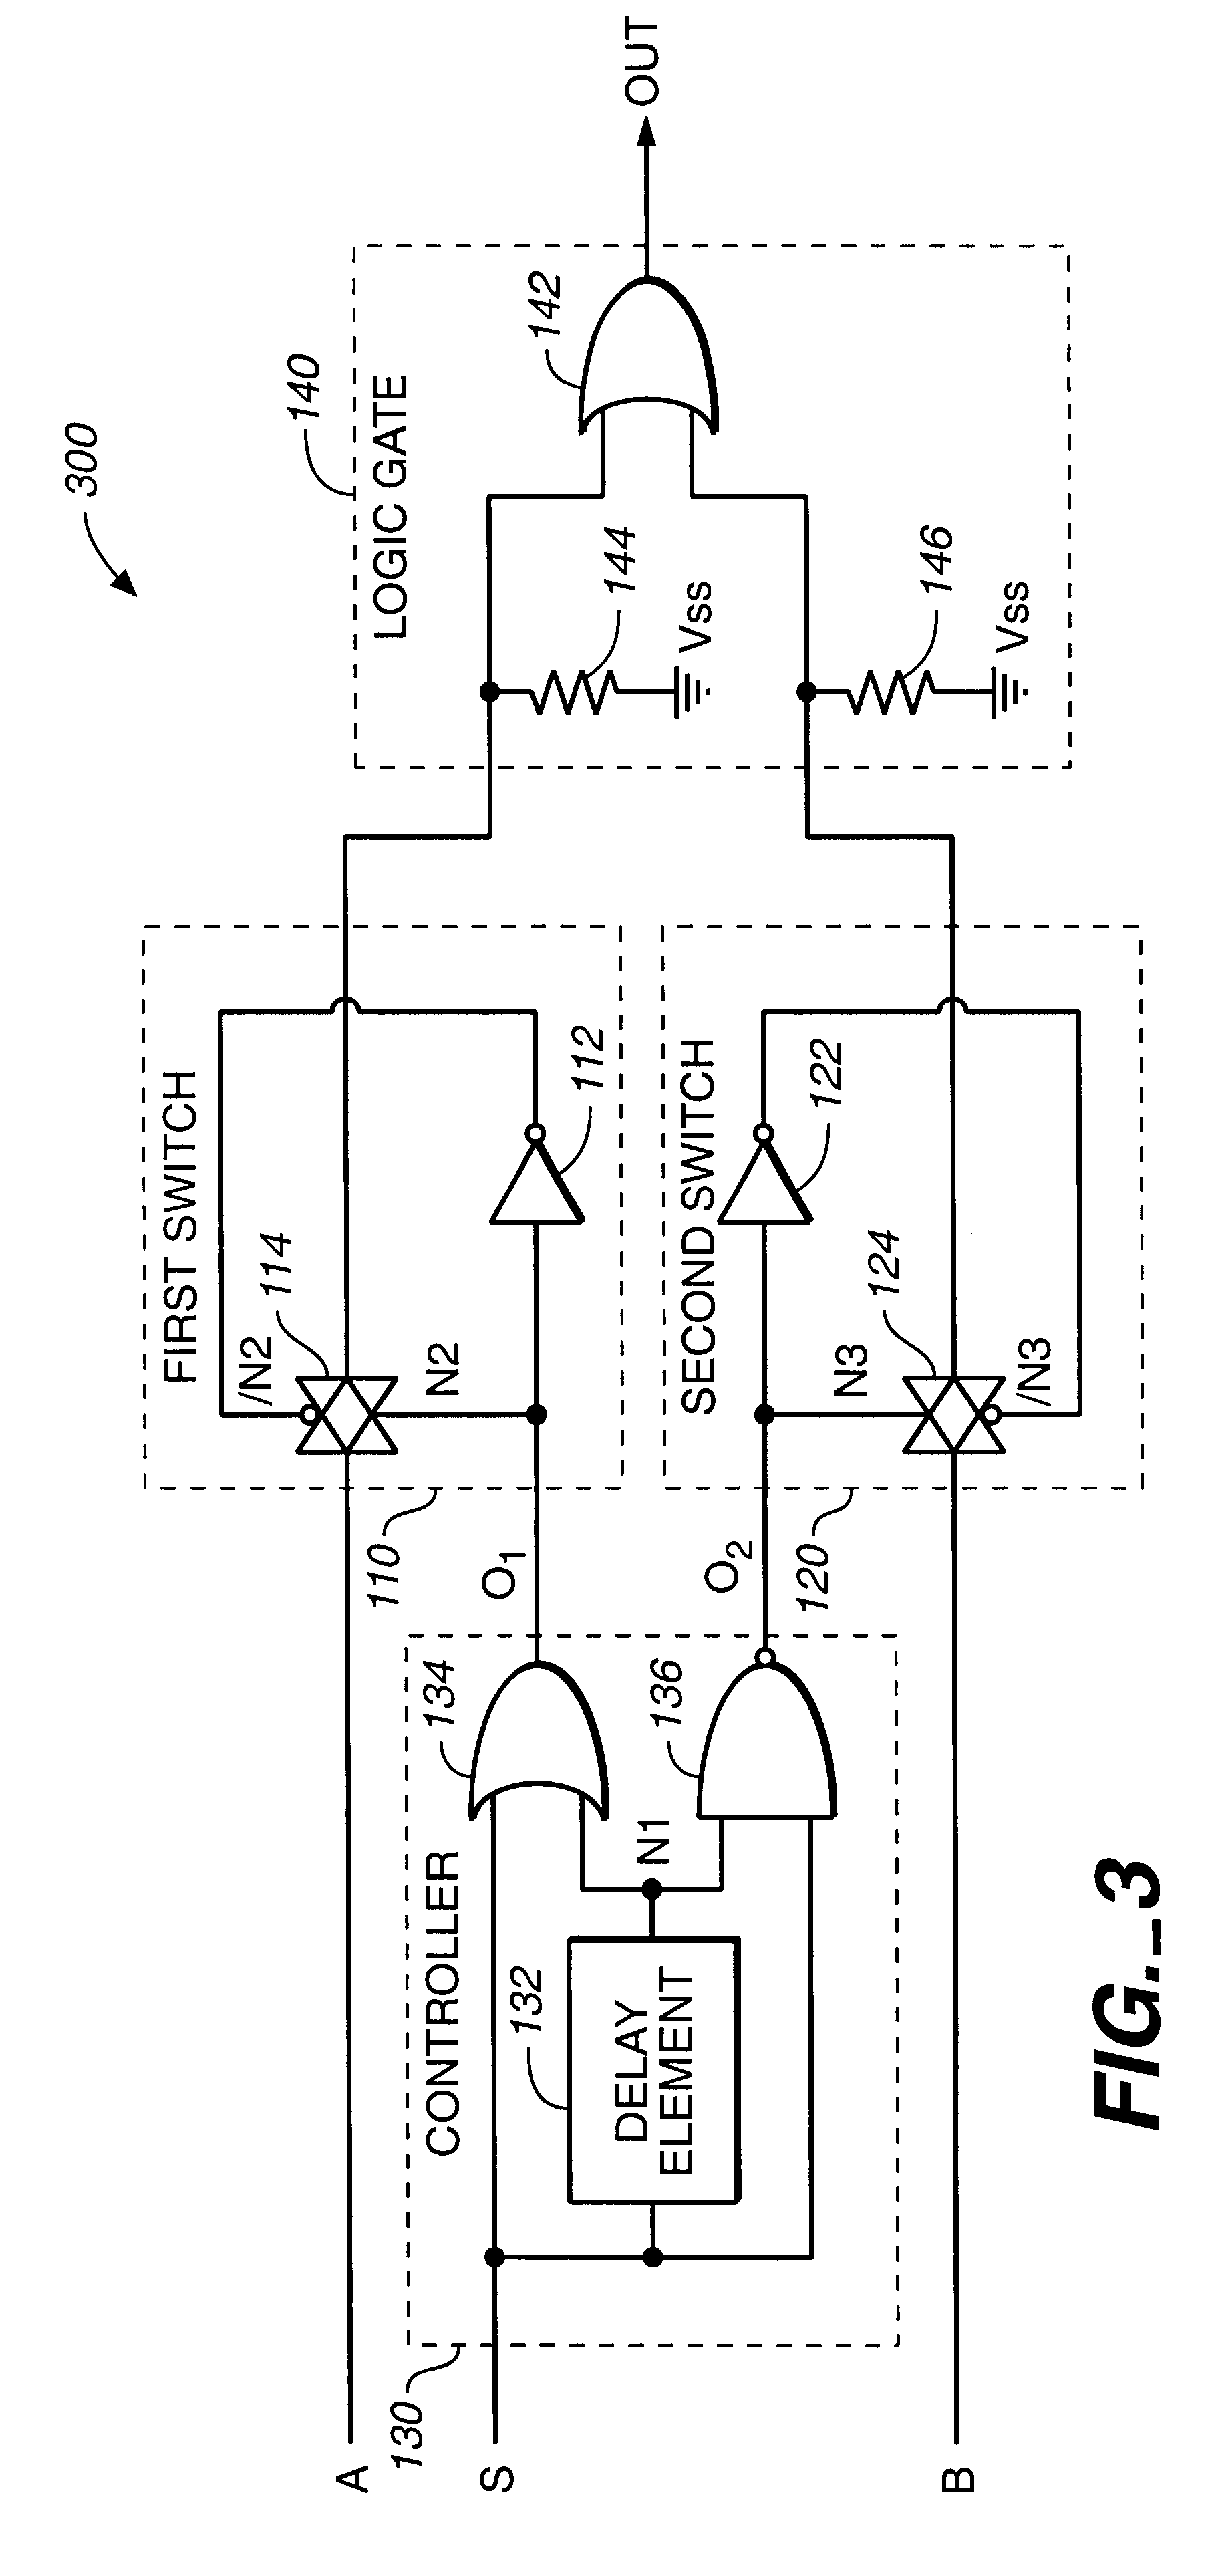 Circuit and method for switching between digital signals that have different signal rates